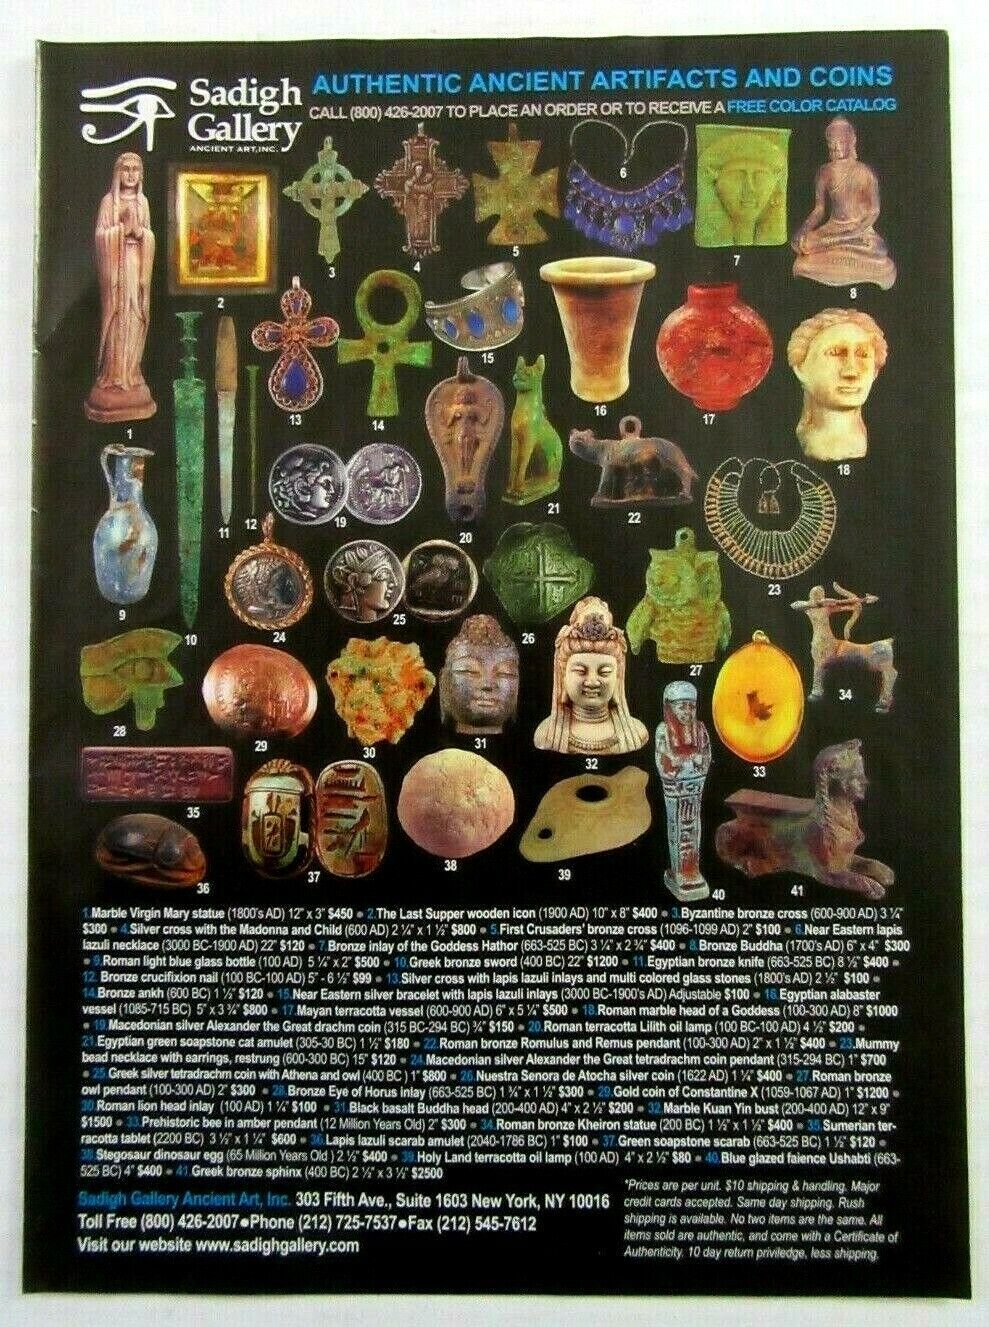 2011 SADIGH GALLERY Authentic Ancient Artifacts & Coins Magazine Ad